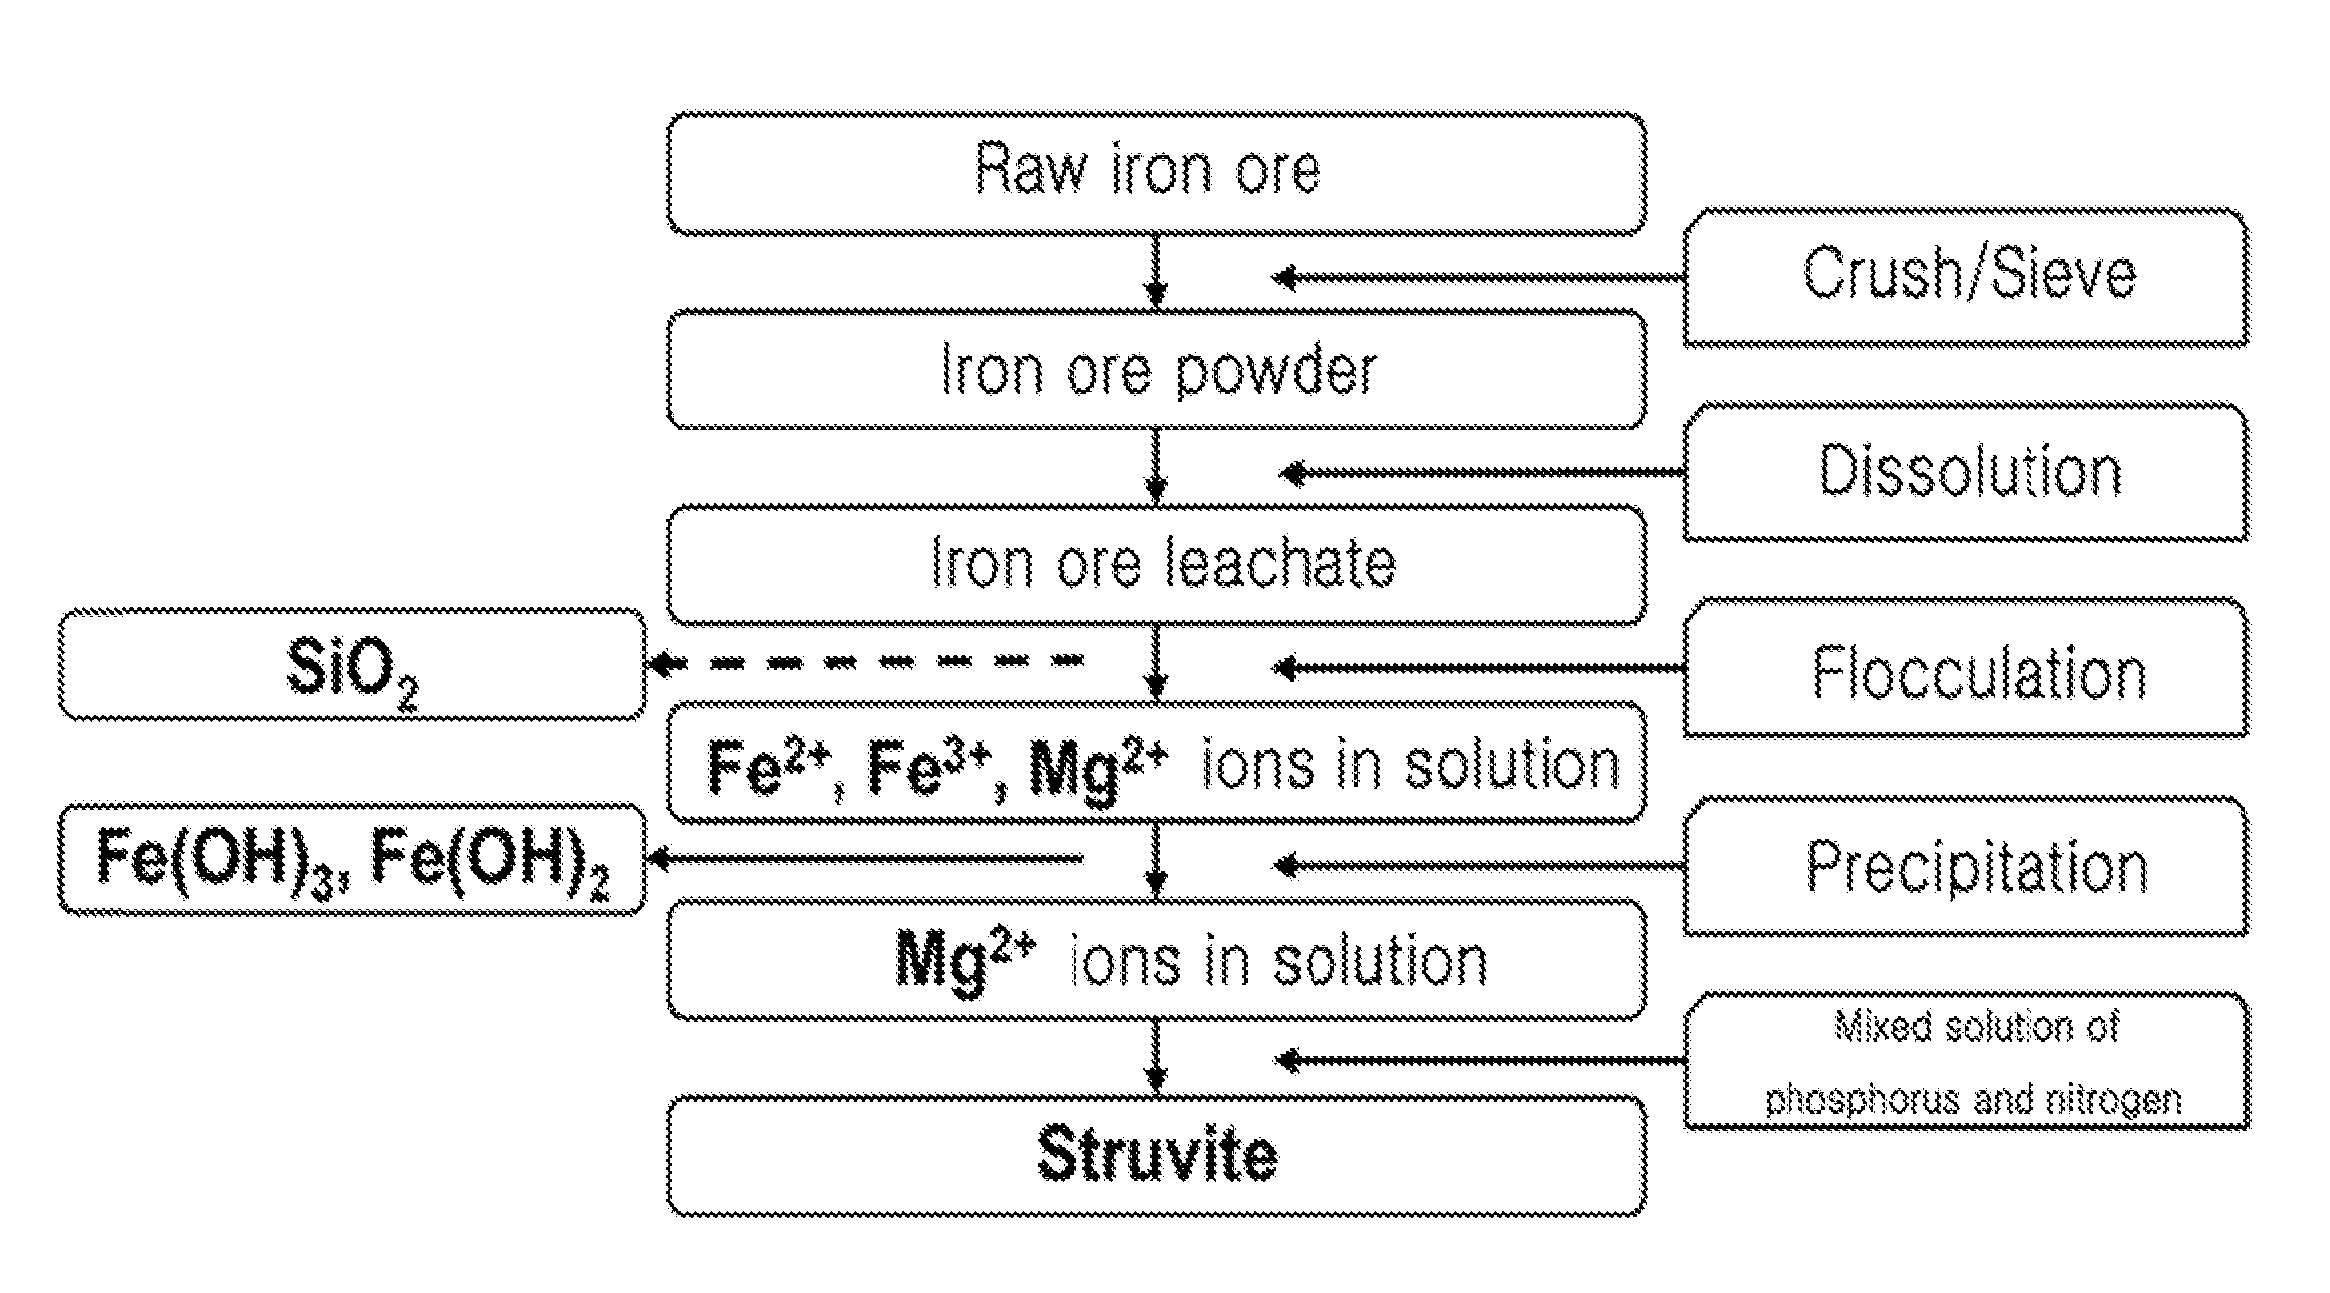 Method for removing phosphorus and nitrogen contained in sewage or wastewater using iron ore wastewater